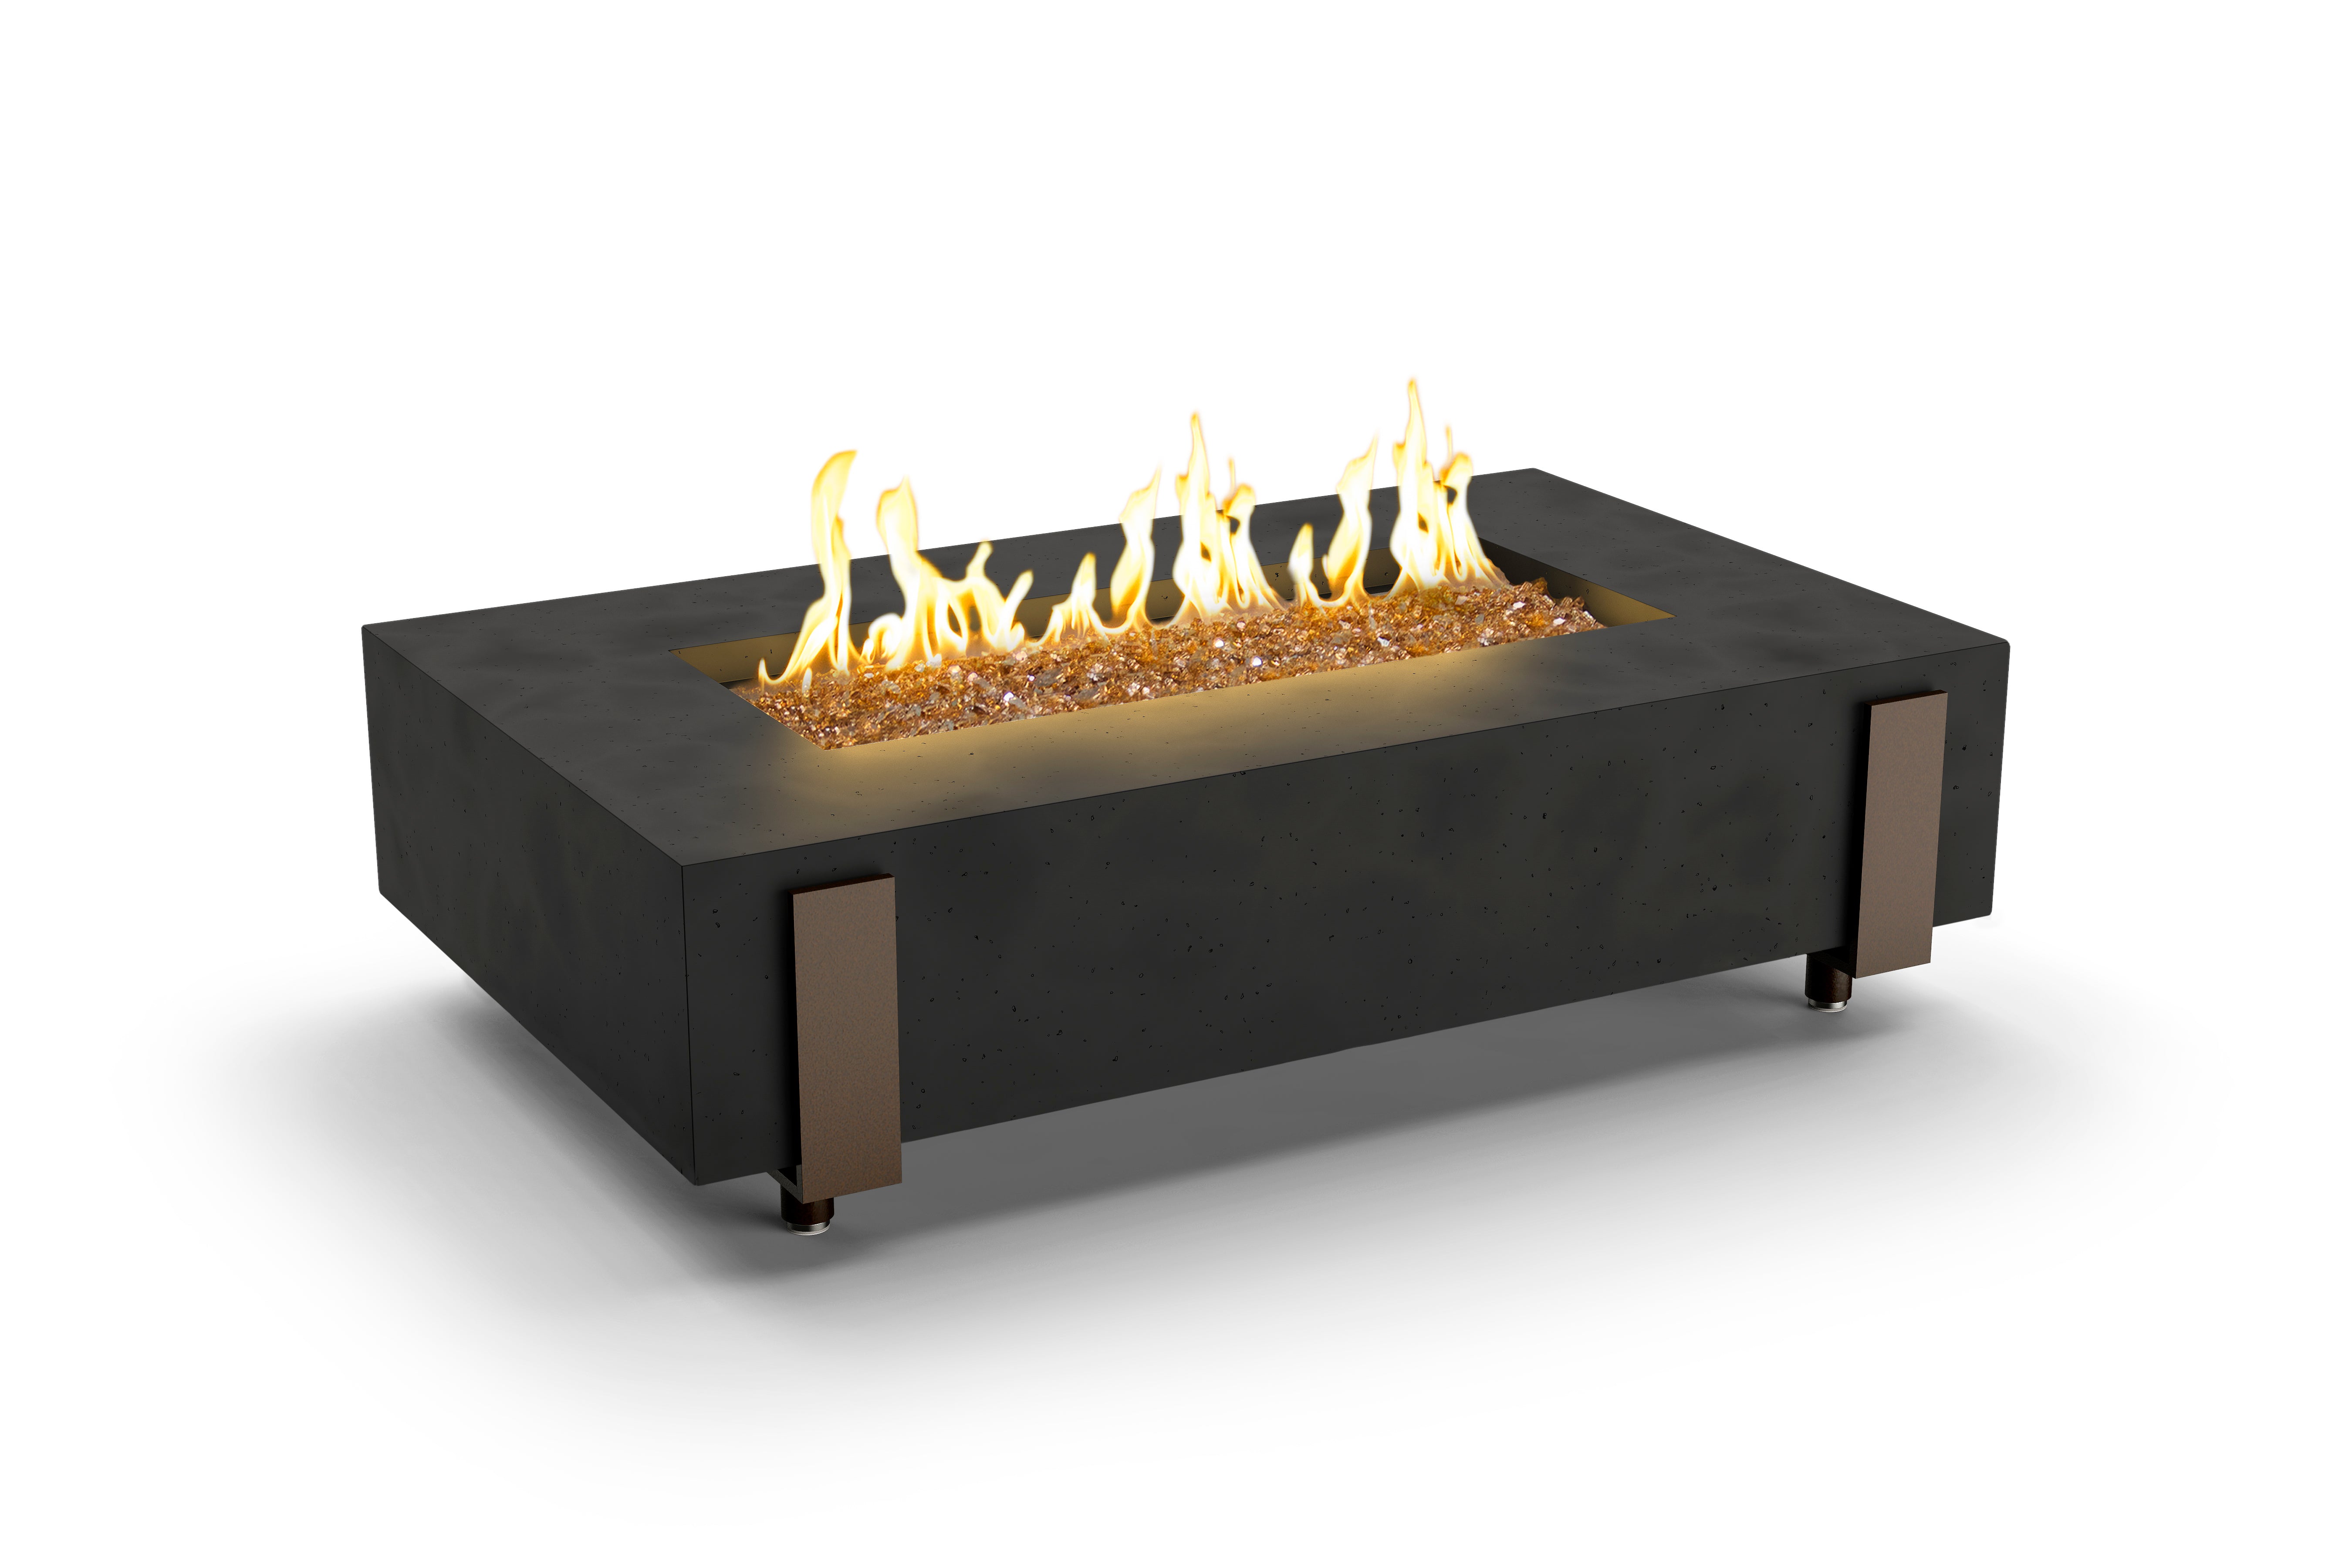 60" x 36" Iron Saddle Firetable Rectangle Fire table  by American Fyre Design